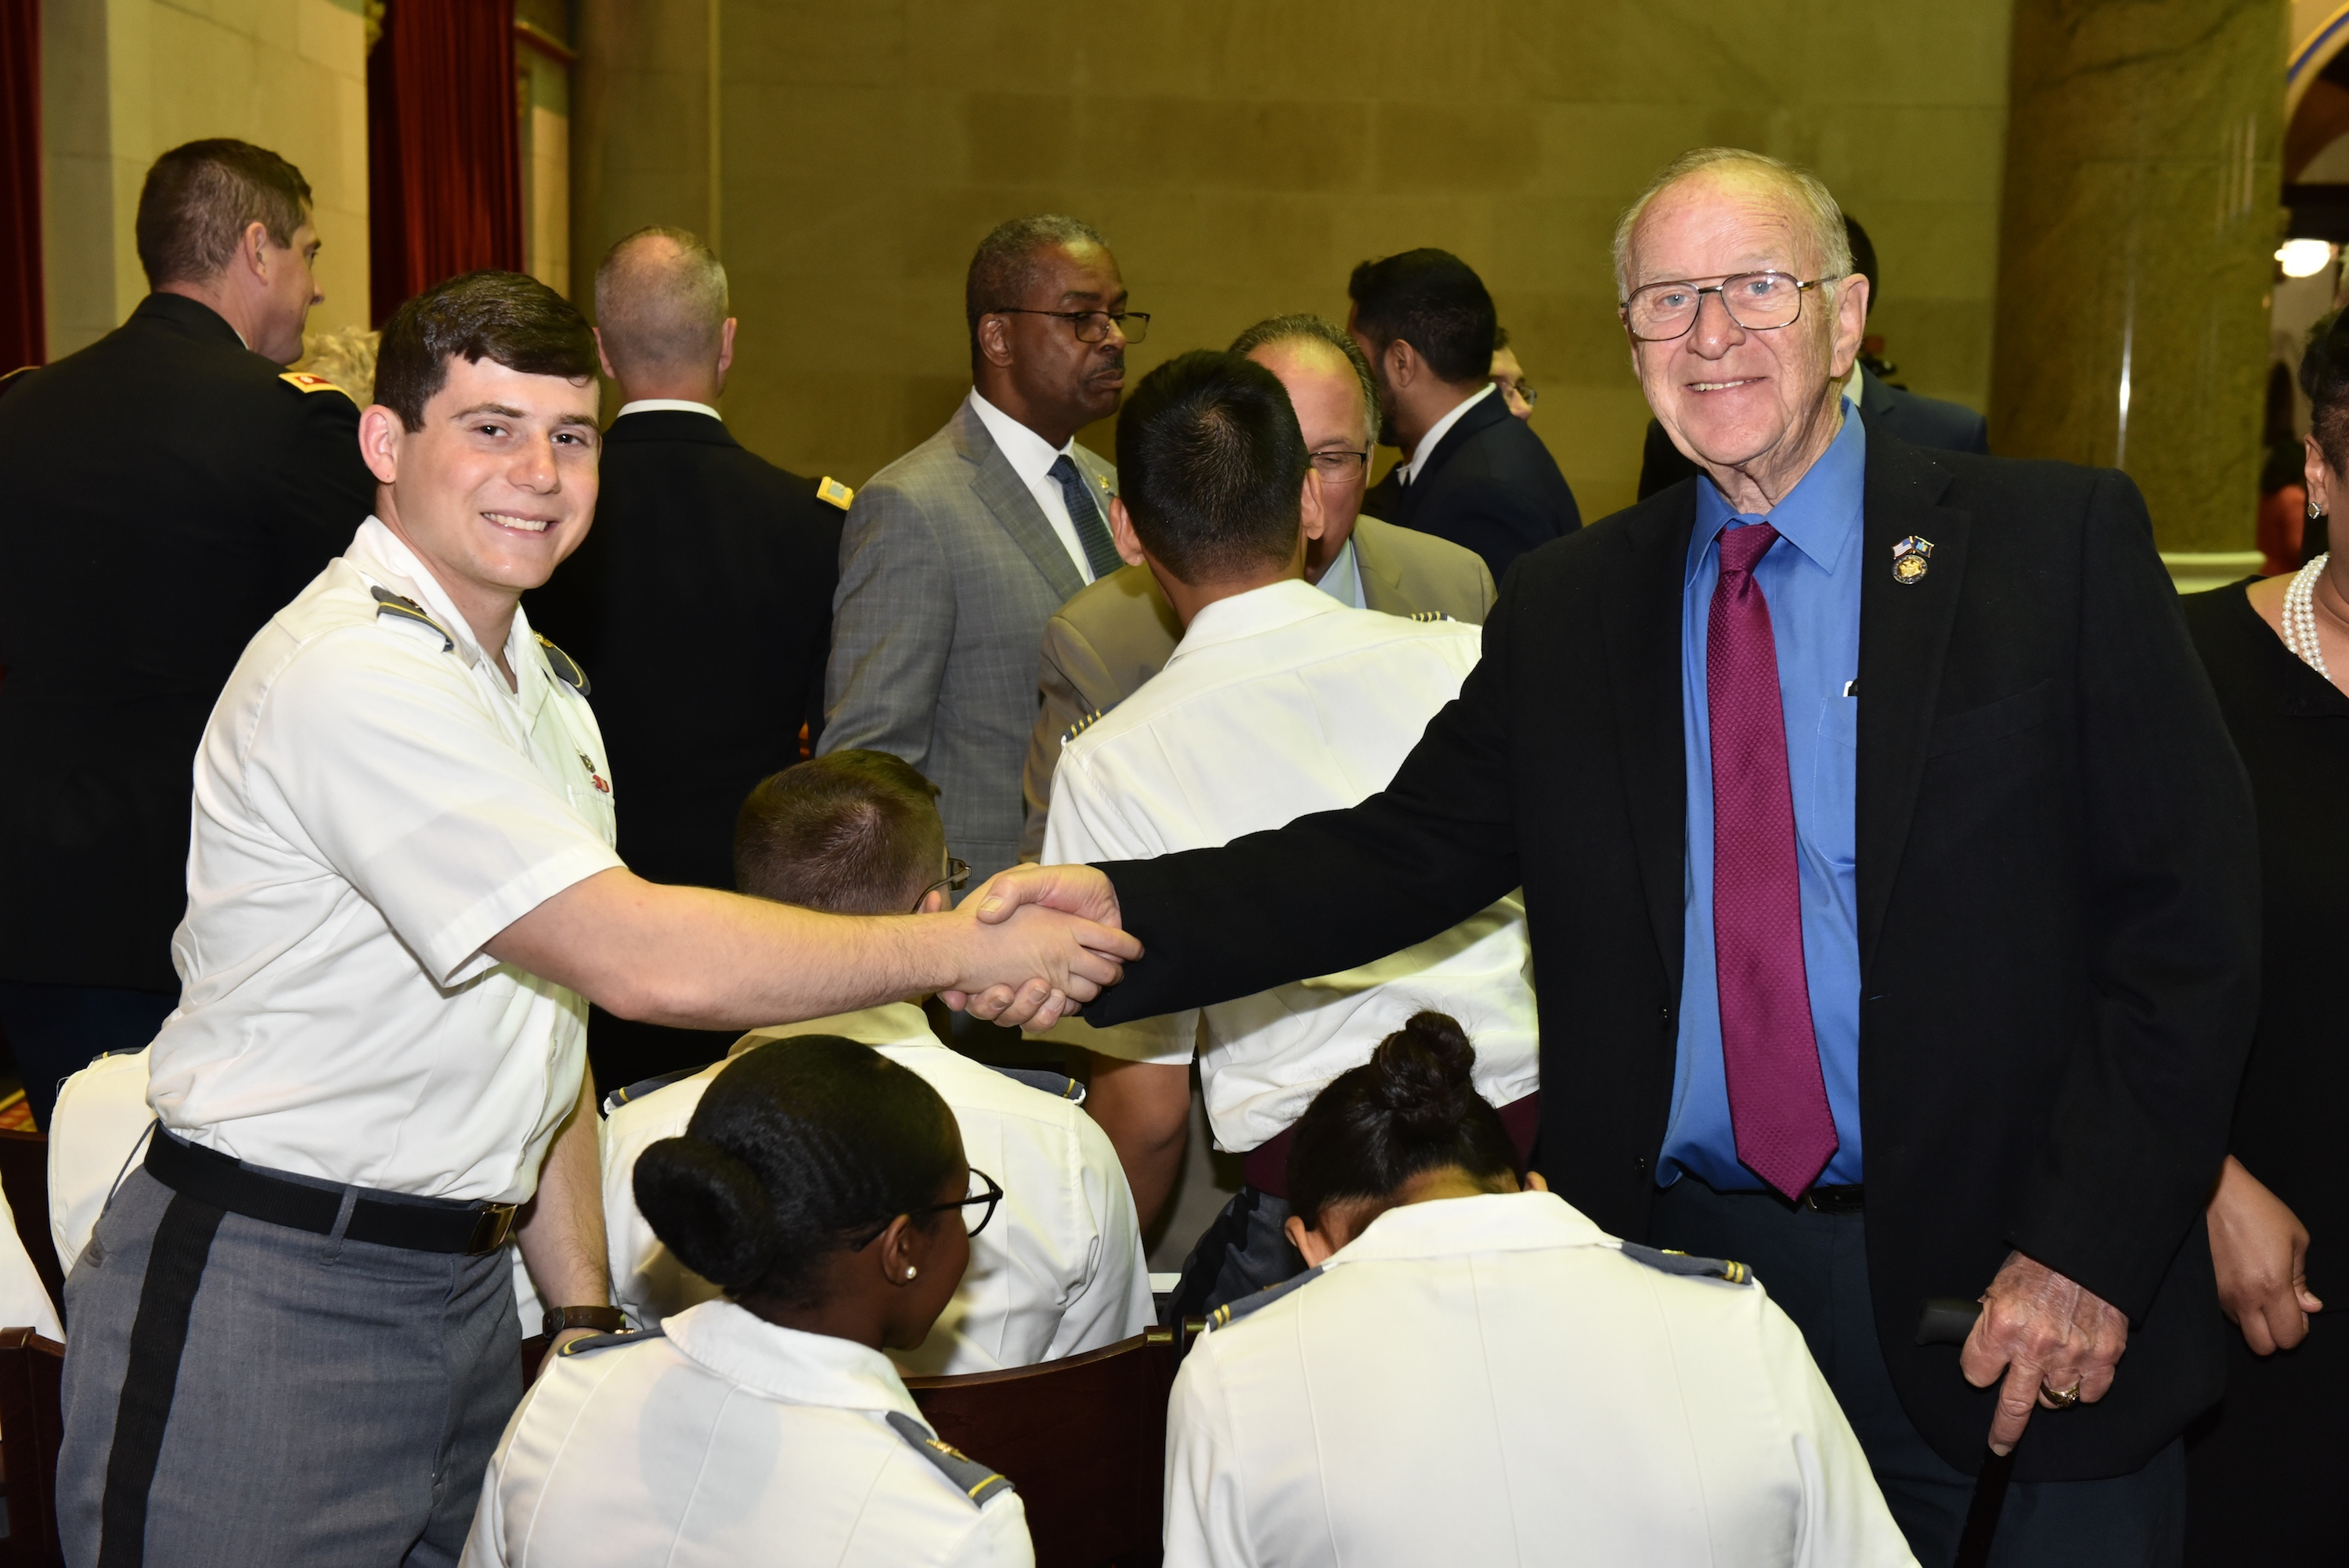 Assemblyman Dave McDonough (R,C,I-Merrick) welcomes West Point Cadet and constituent Matthew Montera to the Assembly Chamber Wednesday, May 1.